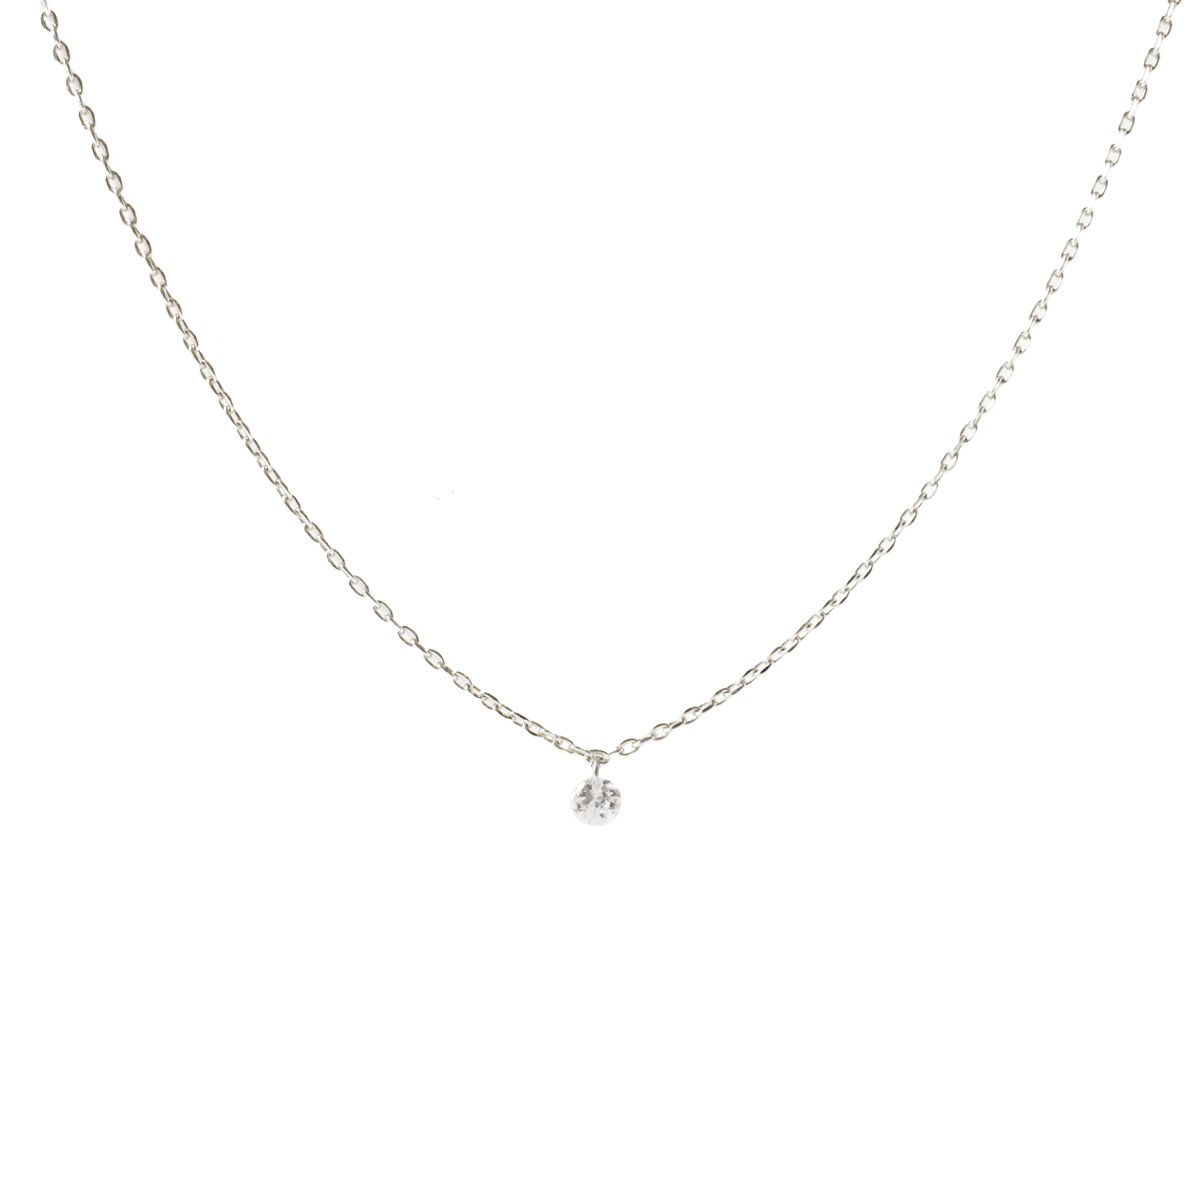 DAINTY RADIANT SOLITAIRE NECKLACE - CUBIC ZIRCONIA &amp; SILVER - SO PRETTY CARA COTTER